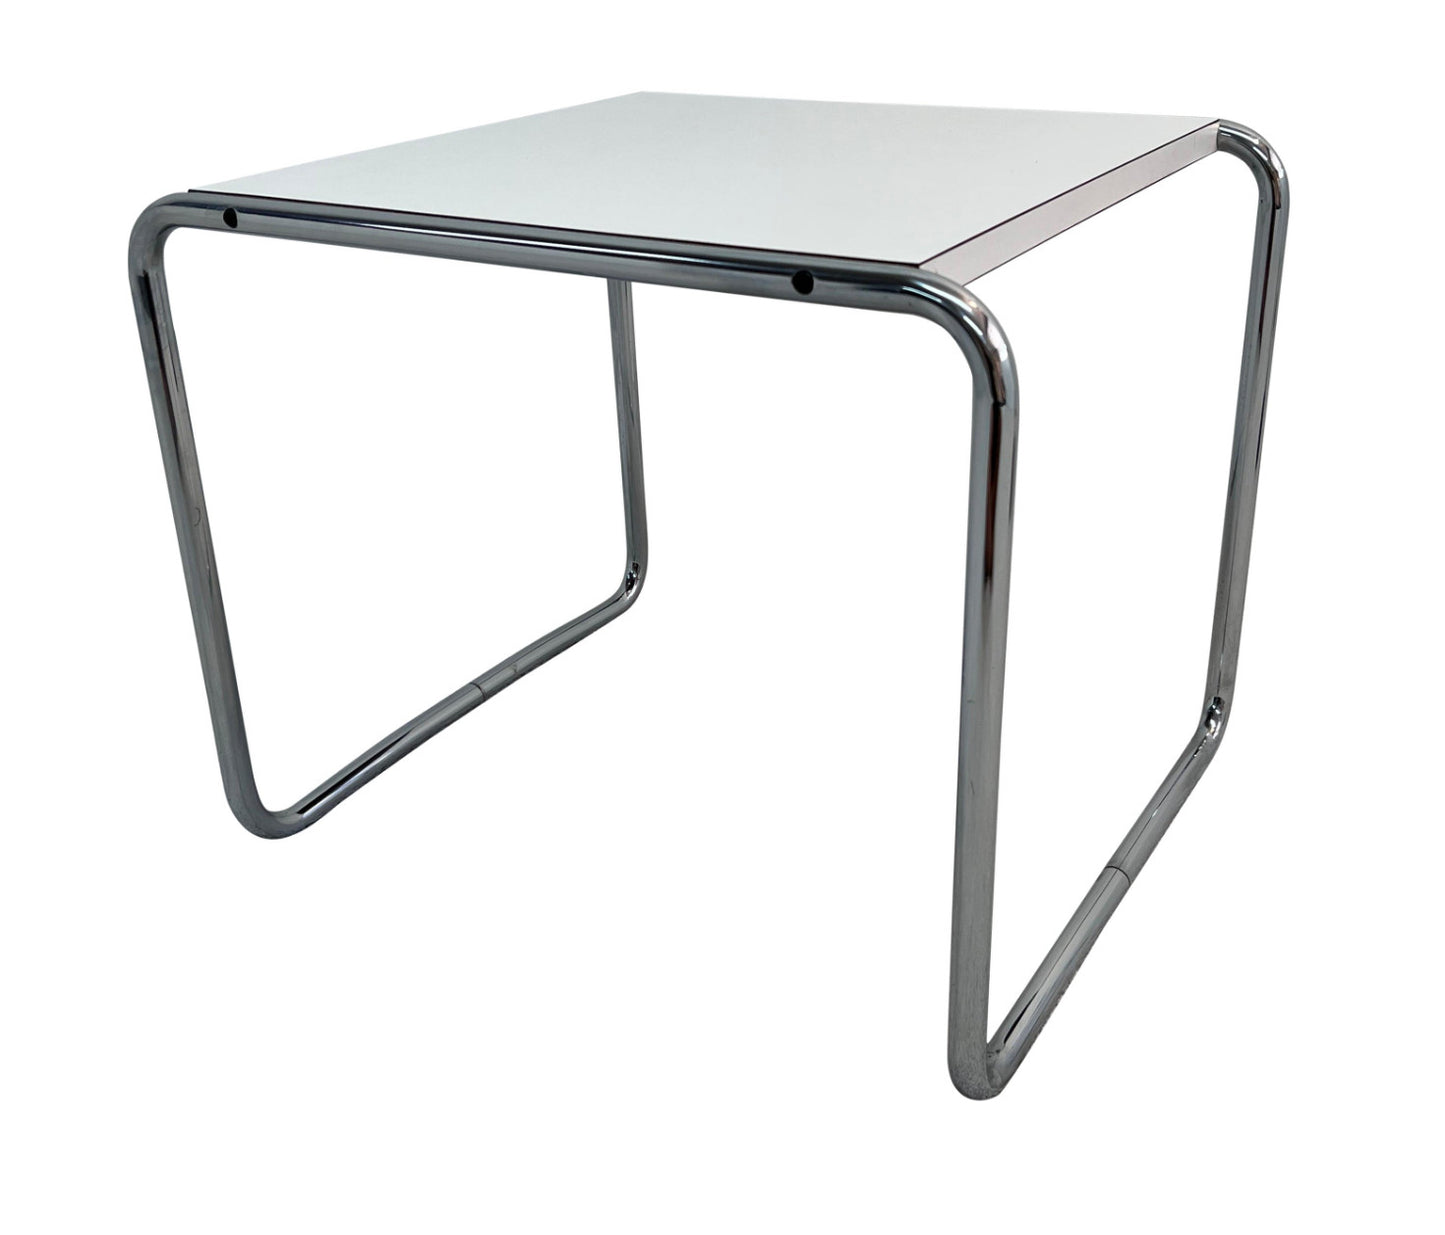 Bauhaus "Laccio Side" Table by Marcel Breuer for Knoll